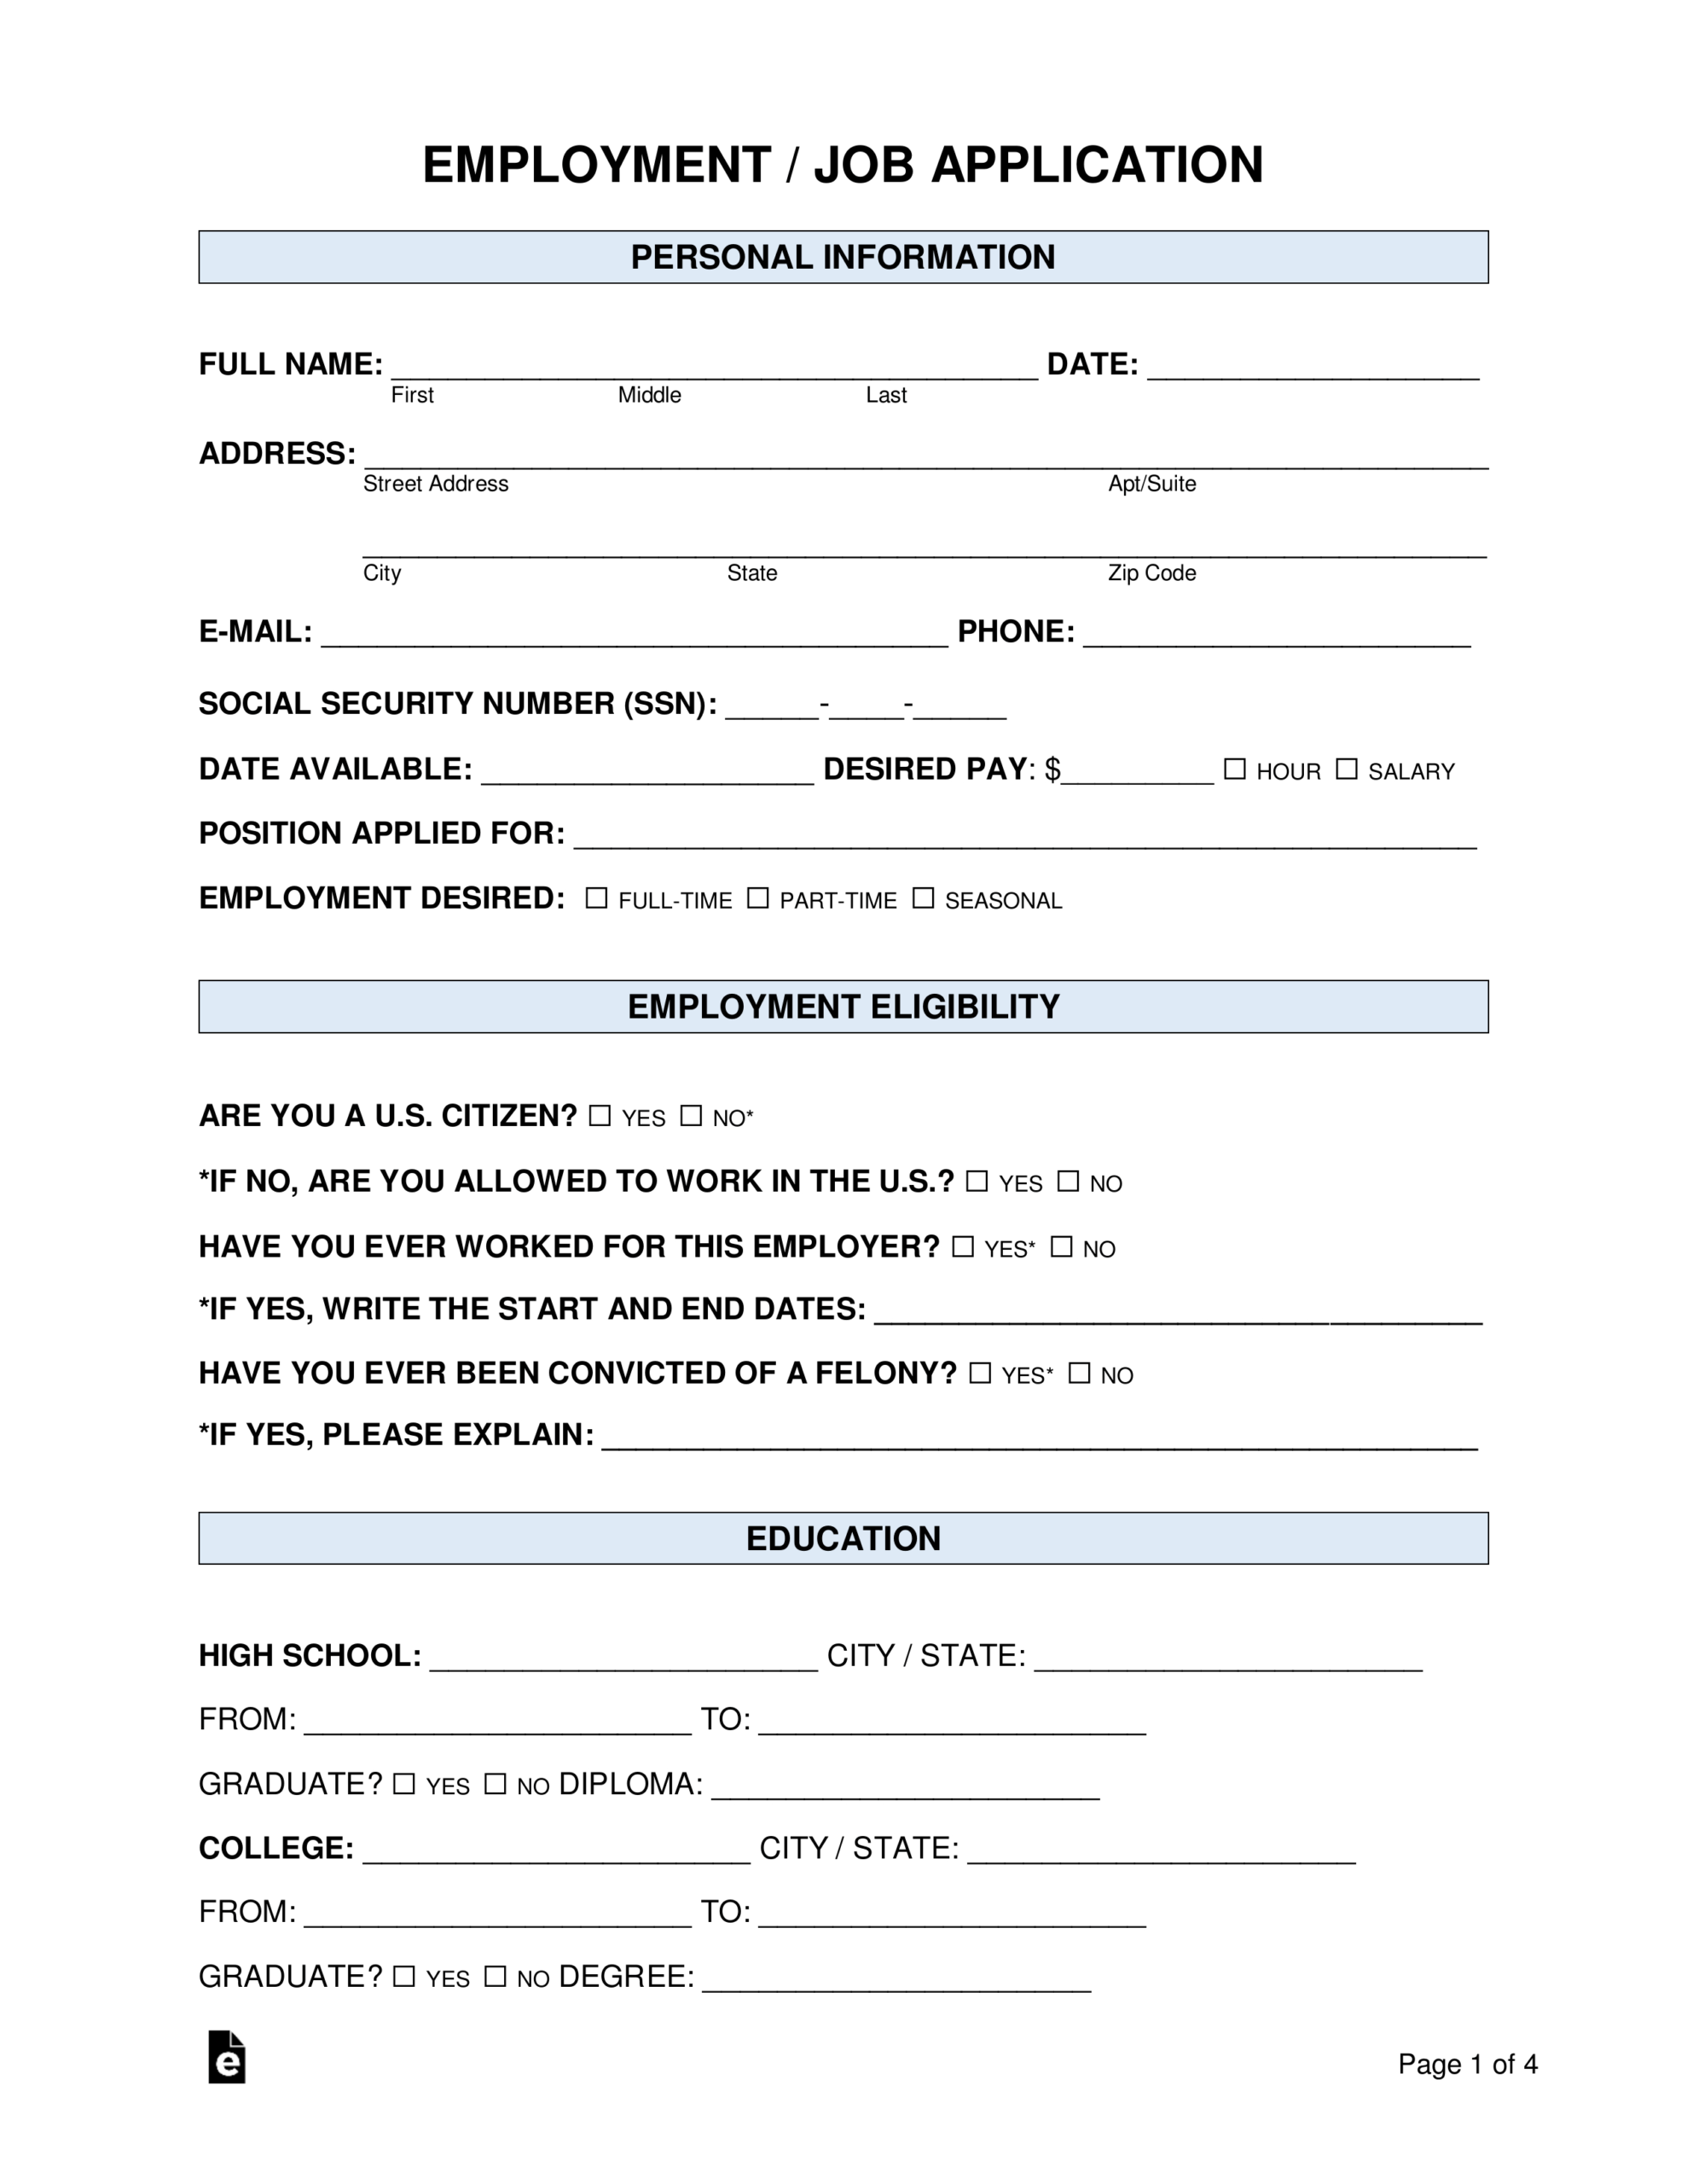 Free Job Application Form – Standard Template – Word | Pdf For Employment Application Template Microsoft Word